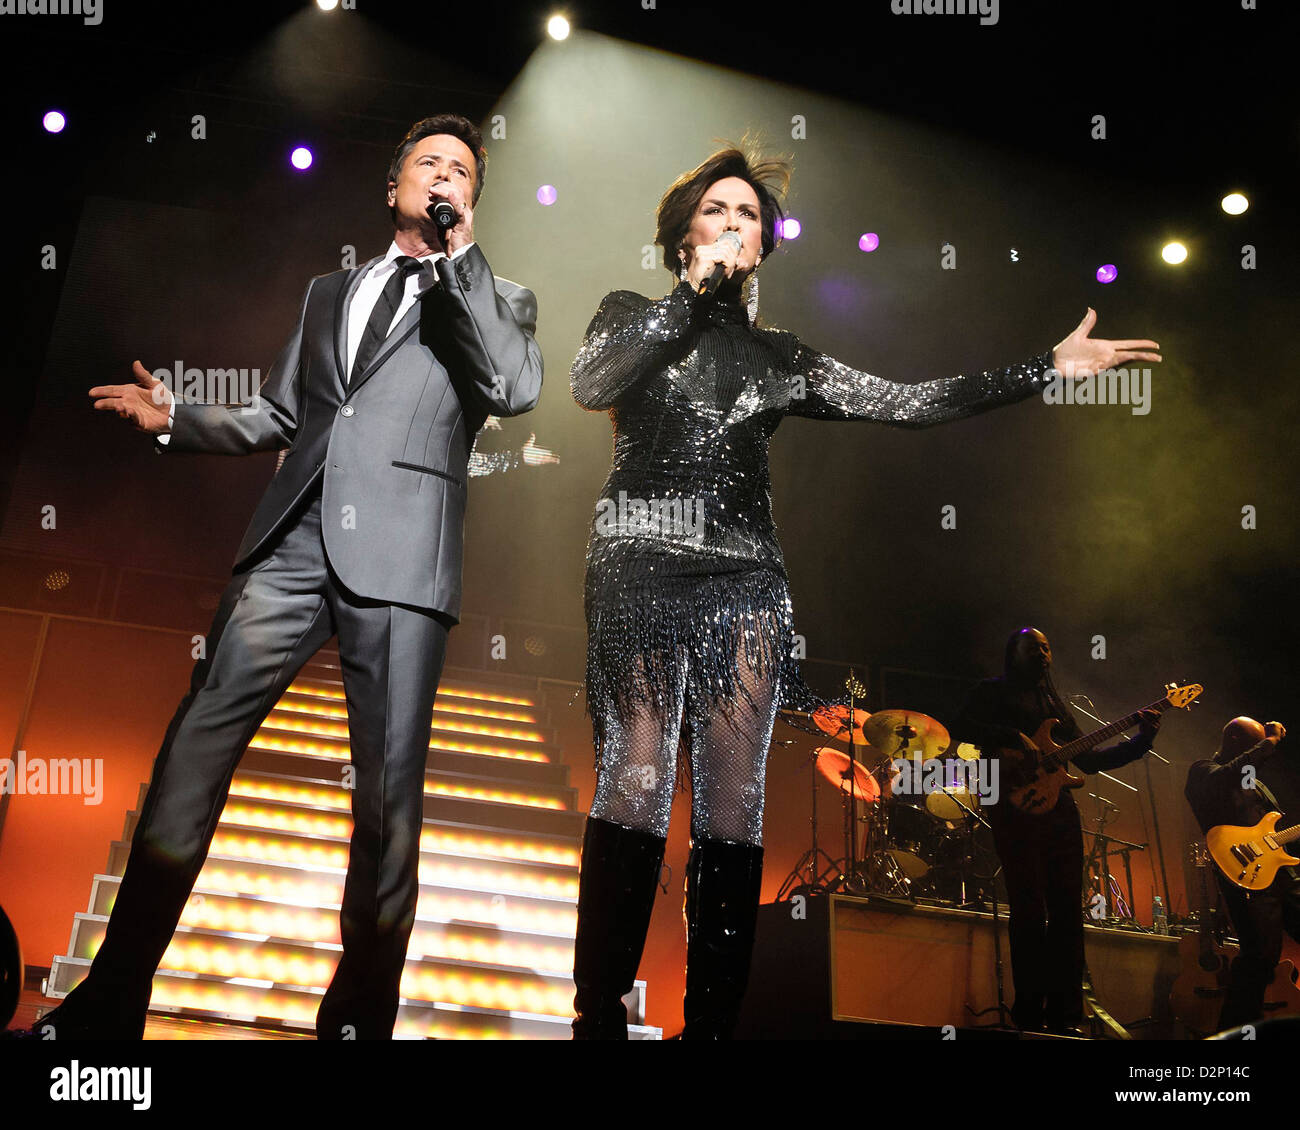 Donny and Marie  plays Brighton Centre on 21/01/2013 at Brighton Centre, Brighton. The award winning performers celebrate their 50 plus years in entertainment with a tour of the UK taking fans on a journey through their many unforgettable hits - from classics such as 'One Bad Apple' and “Paper Roses” to 'Love Me For A Reason' and 'Crazy Horses'. Persons pictured: Donny Osmond, Marie Osmond. Picture by Julie Edwards Stock Photo